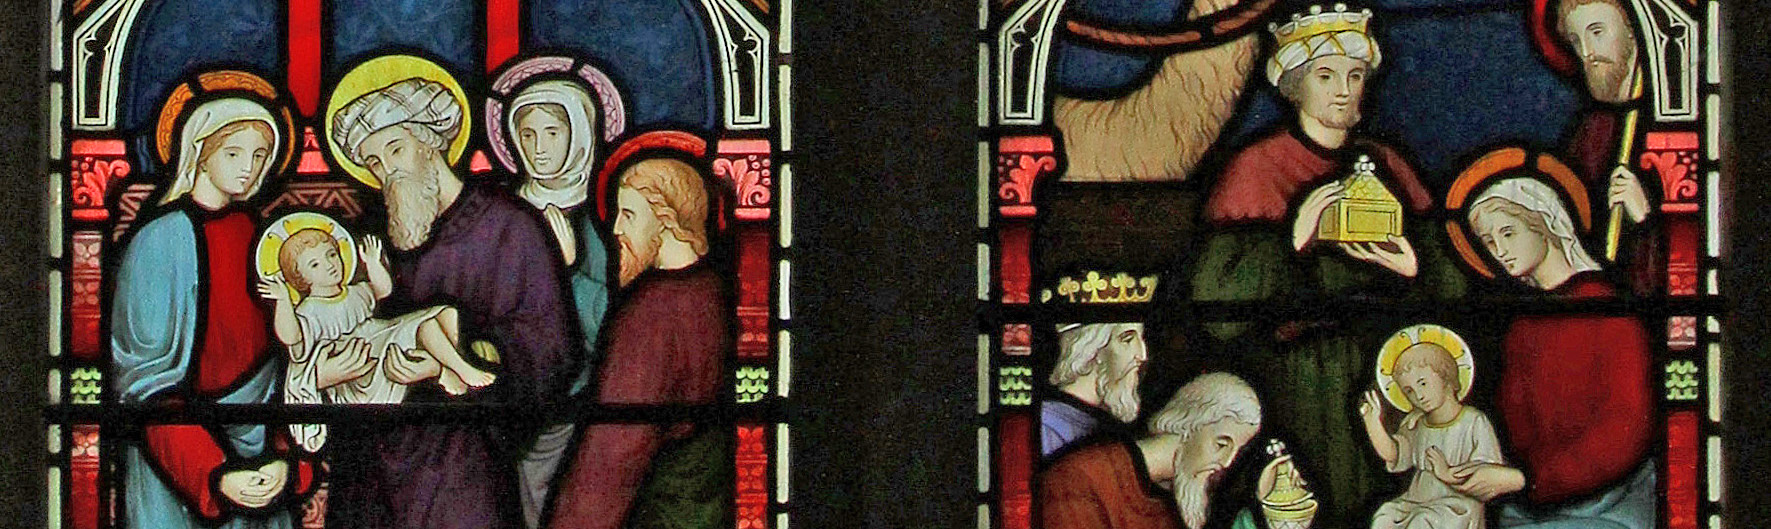 Details from North Aisle window of St George